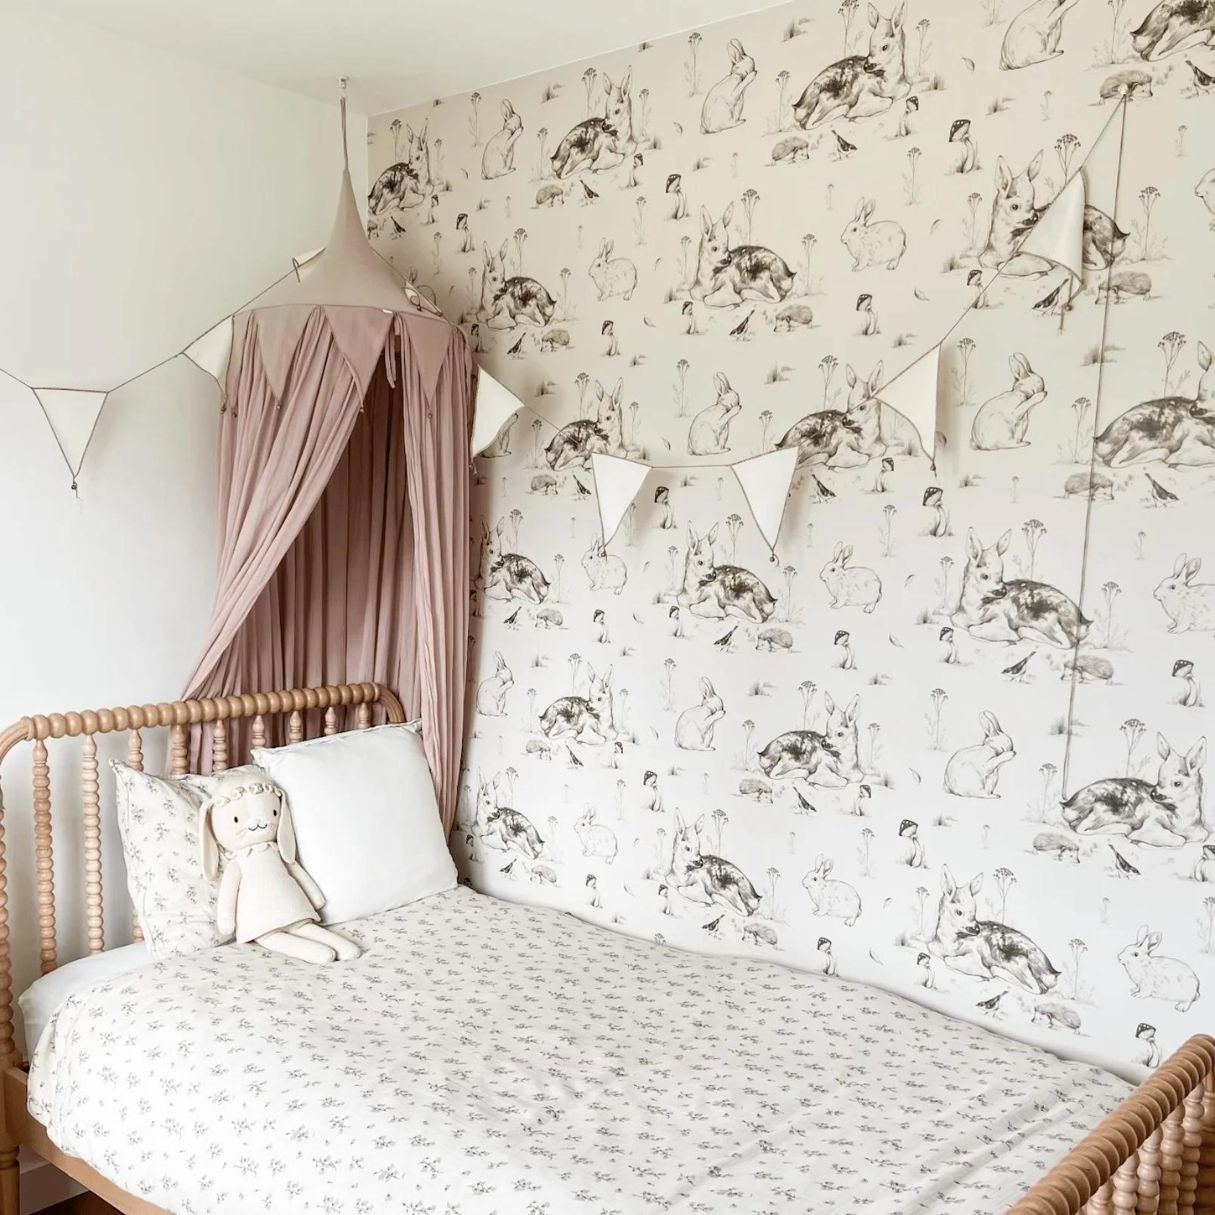 How To Measure For Peel And Stick Wallpaper